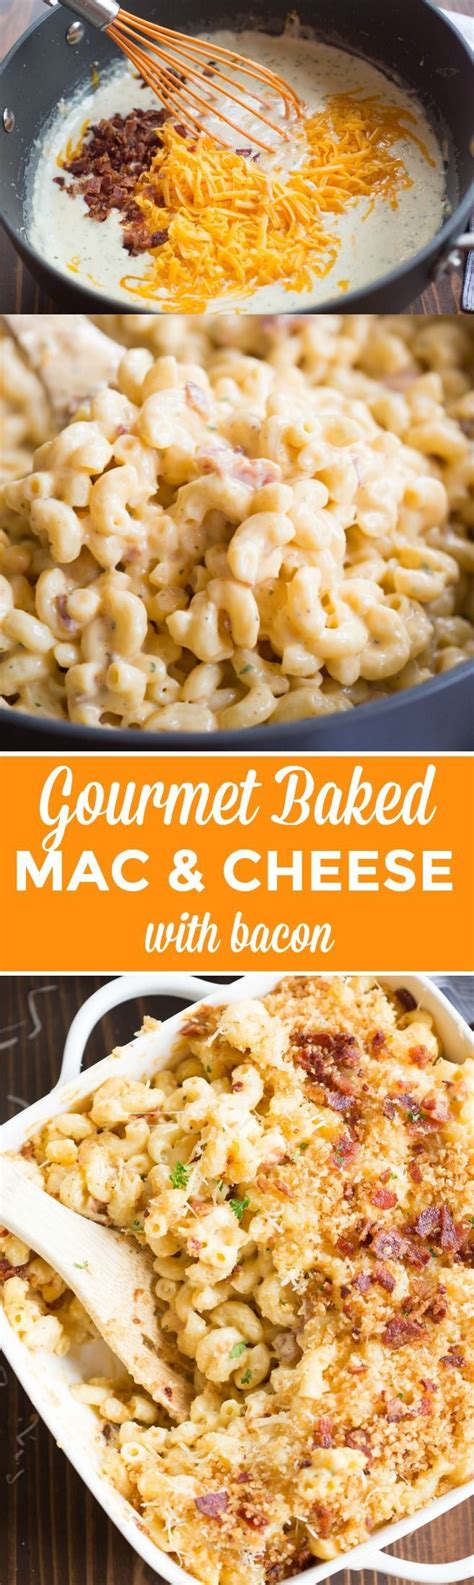 Gourmet Baked Mac And Cheese With Bacon Recipe Recipes Food Baked